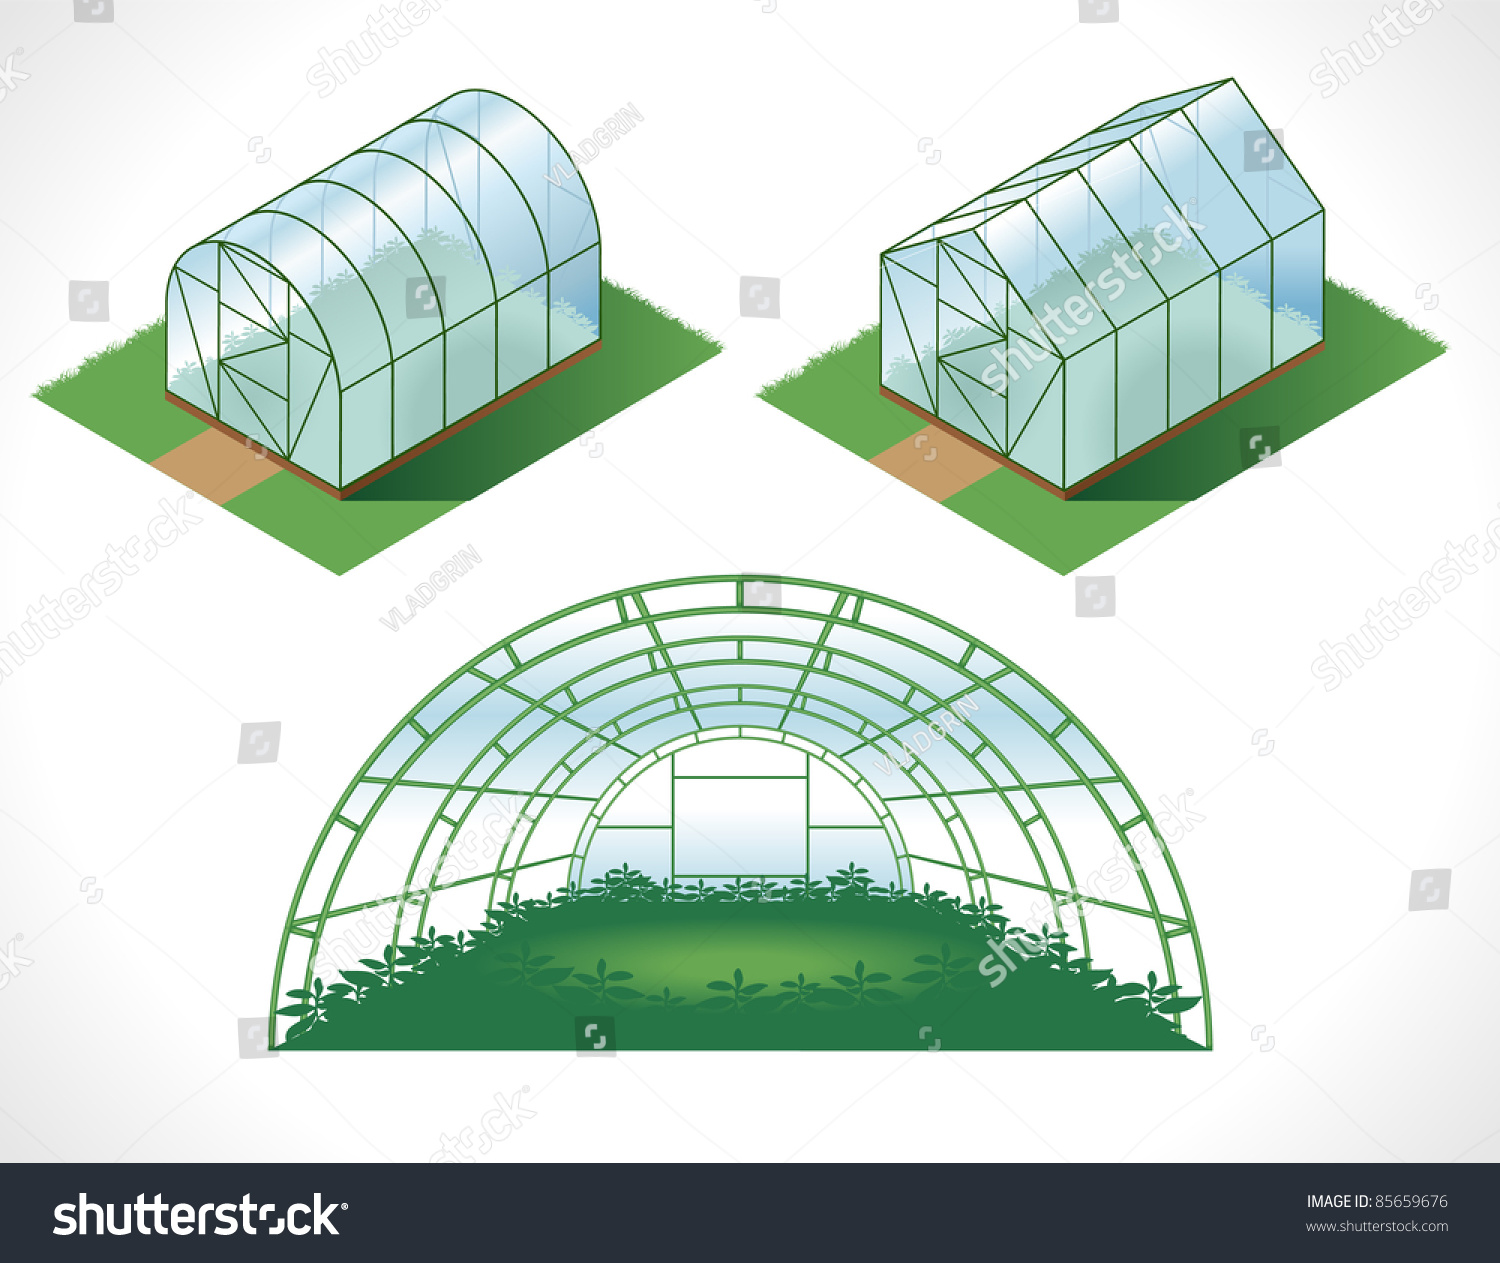 SVG of color picture of different greenhouses. drawing in the isometry svg